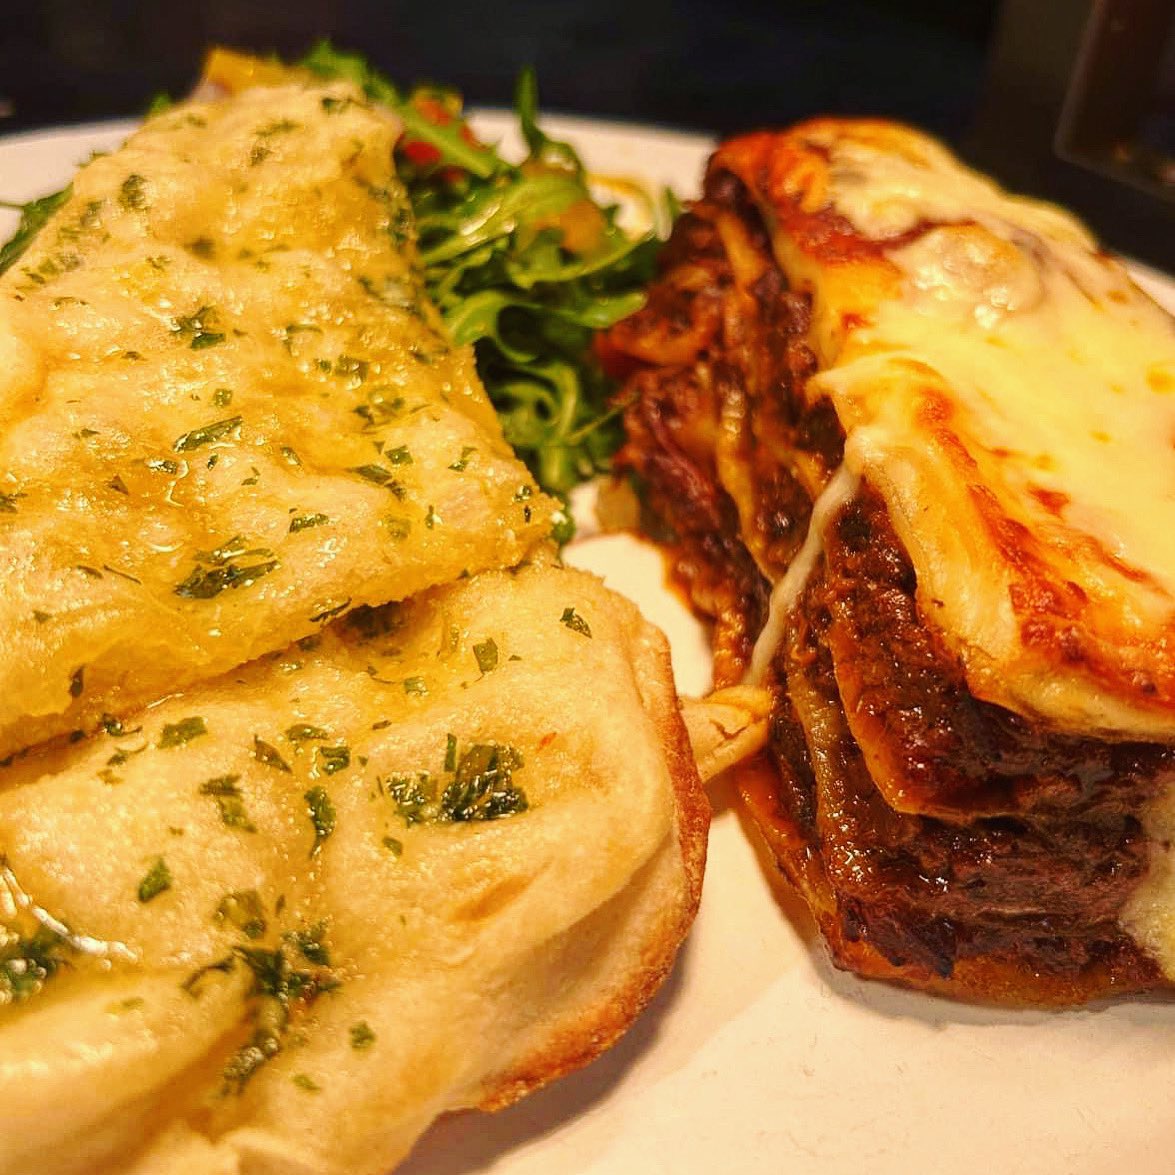 On the specials today, The Salcombe Meat Company bbq slow cooked beef brisket lasagne served w/ garlic pizzetta and dressed concass salad ❤️ #hopecove #salcombe #kingsbridge #dartmouth #totnes